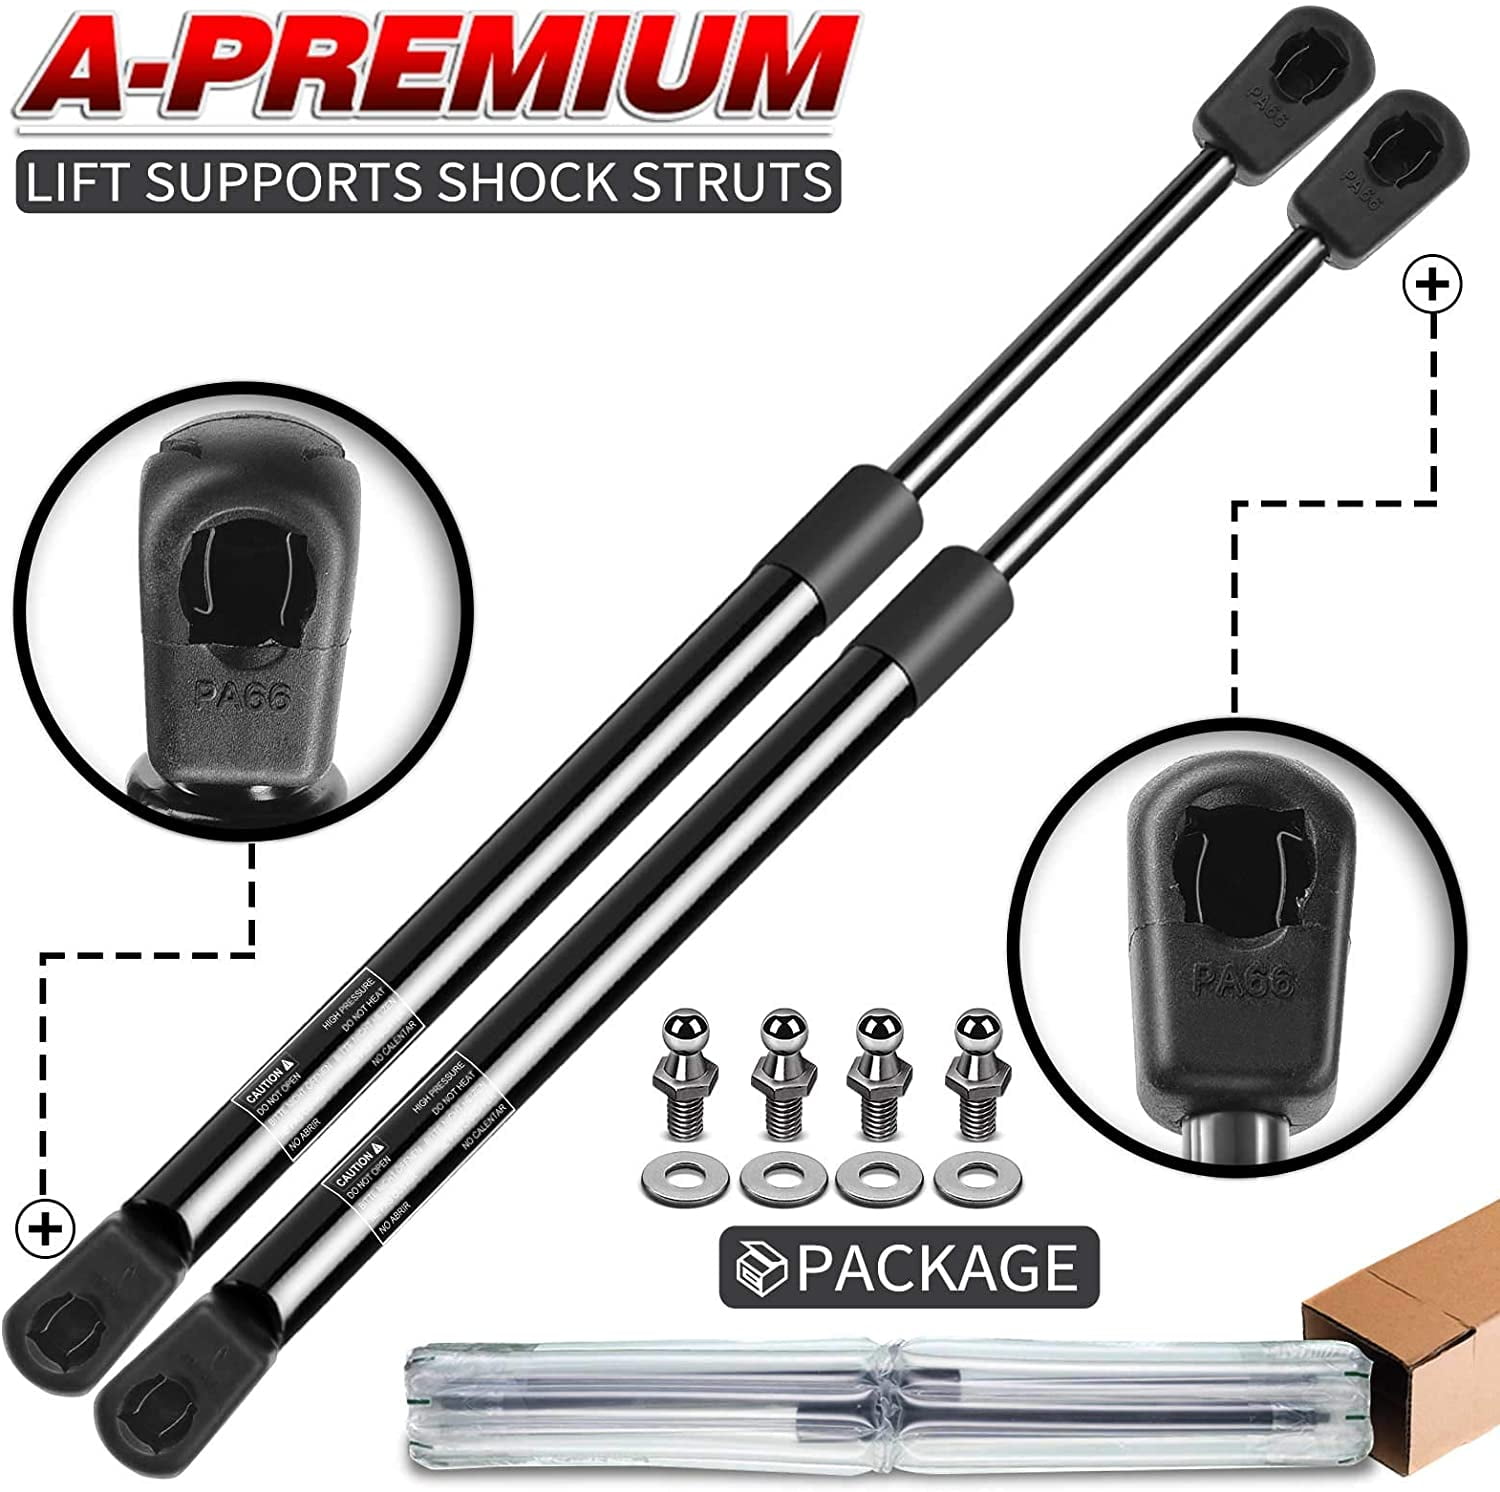 A-Premium 26.34 inch 100lb Lift Supports Gas Spring Shock Struts Replacement for Toolbox Cabinets Sliding Window Storage Bed Bench Lids Basement Door 2-PC Set